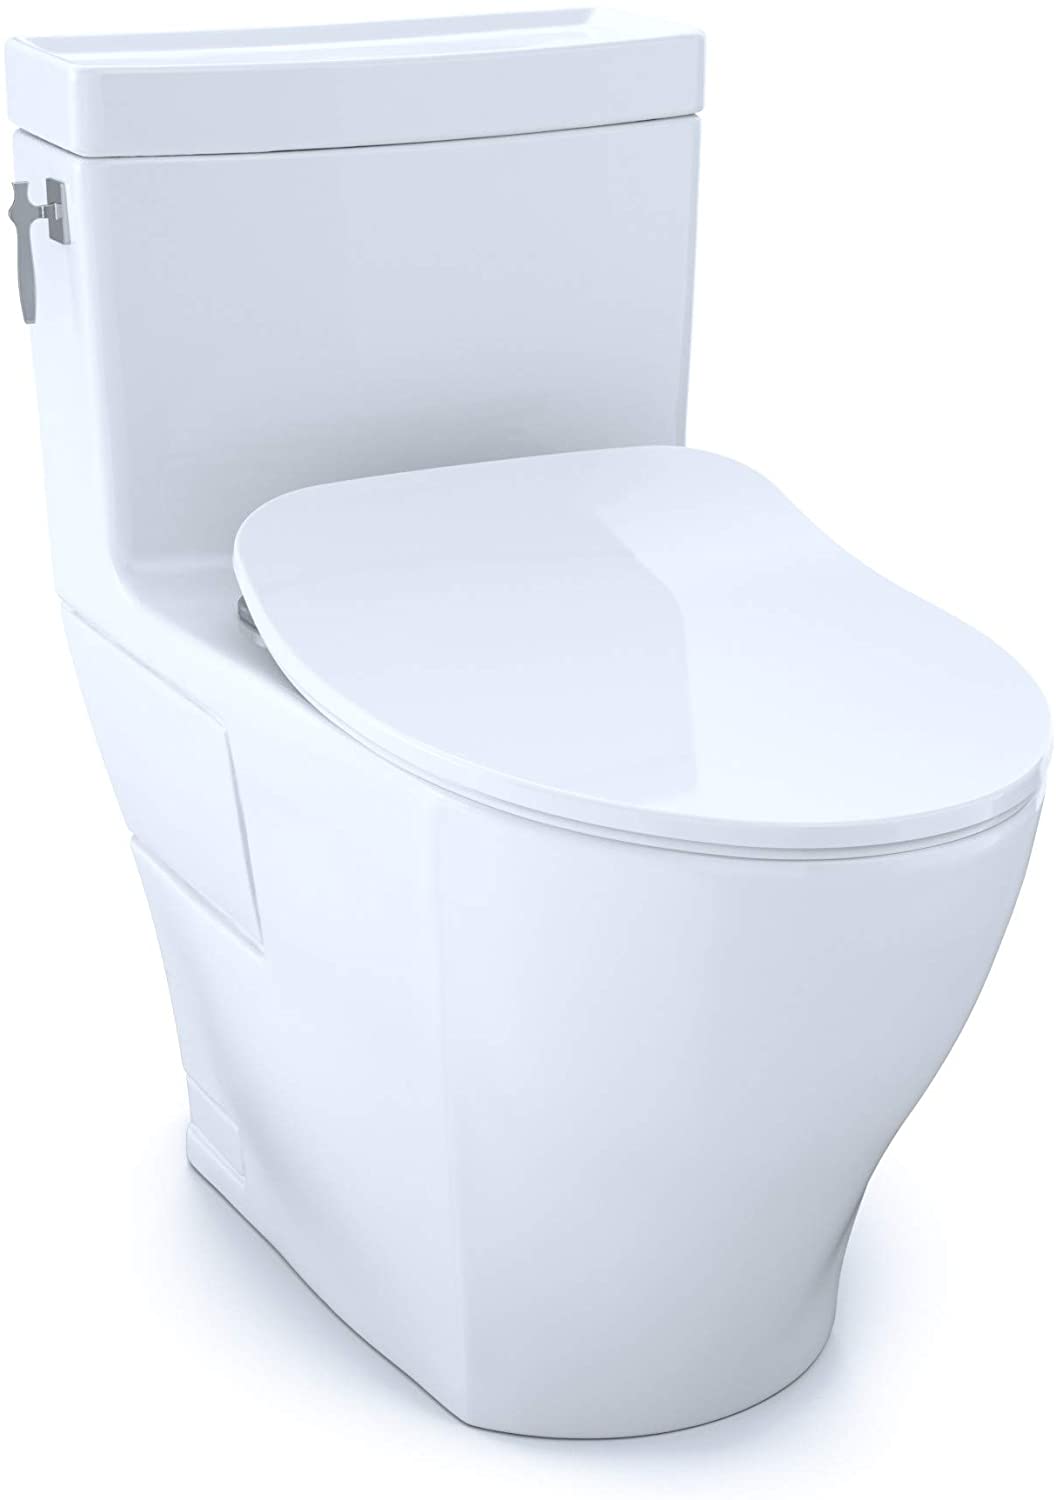 MS626234CEFG#01 - Aimes One-Piece Elongated Toilet - CEFIONTECT and SoftClose Seat - White